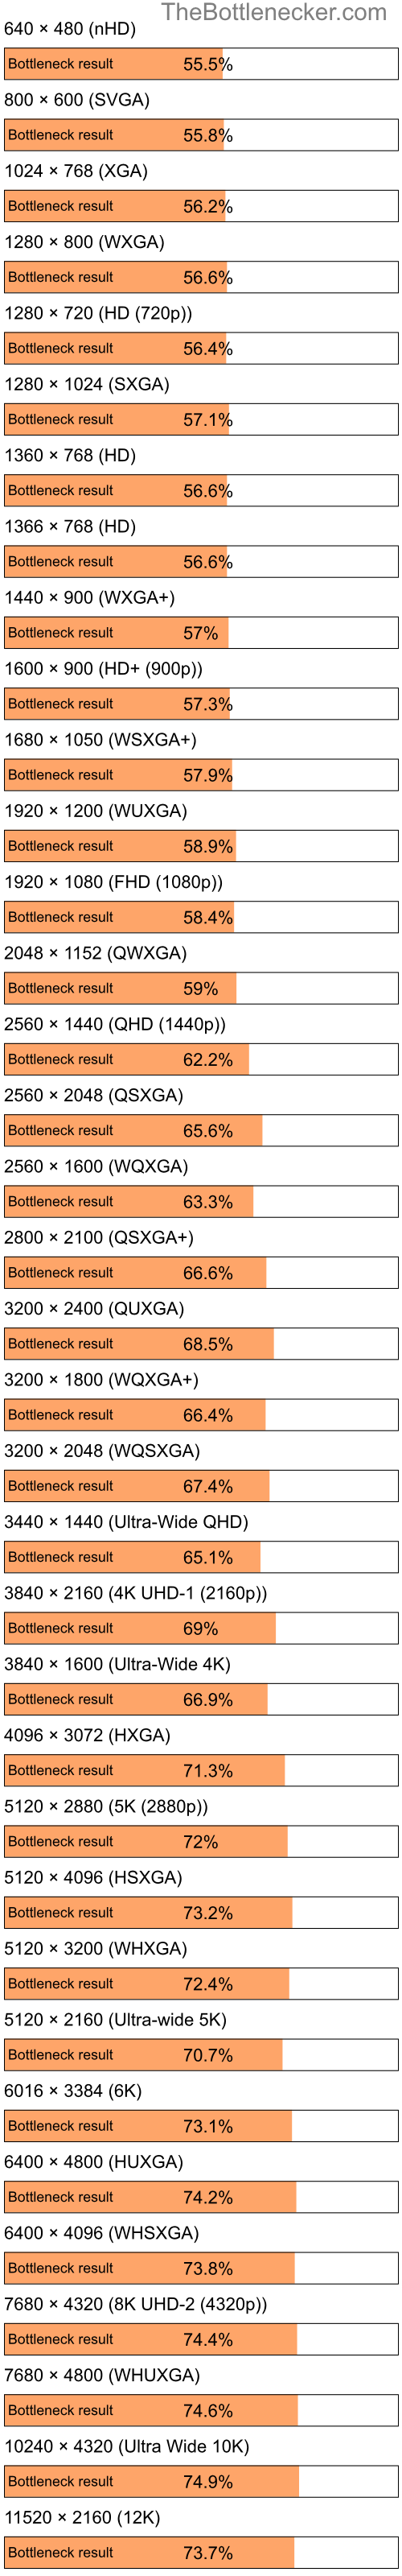 Bottleneck results by resolution for Intel Pentium 4 and NVIDIA GeForce 6700 XL in Processor Intense Tasks